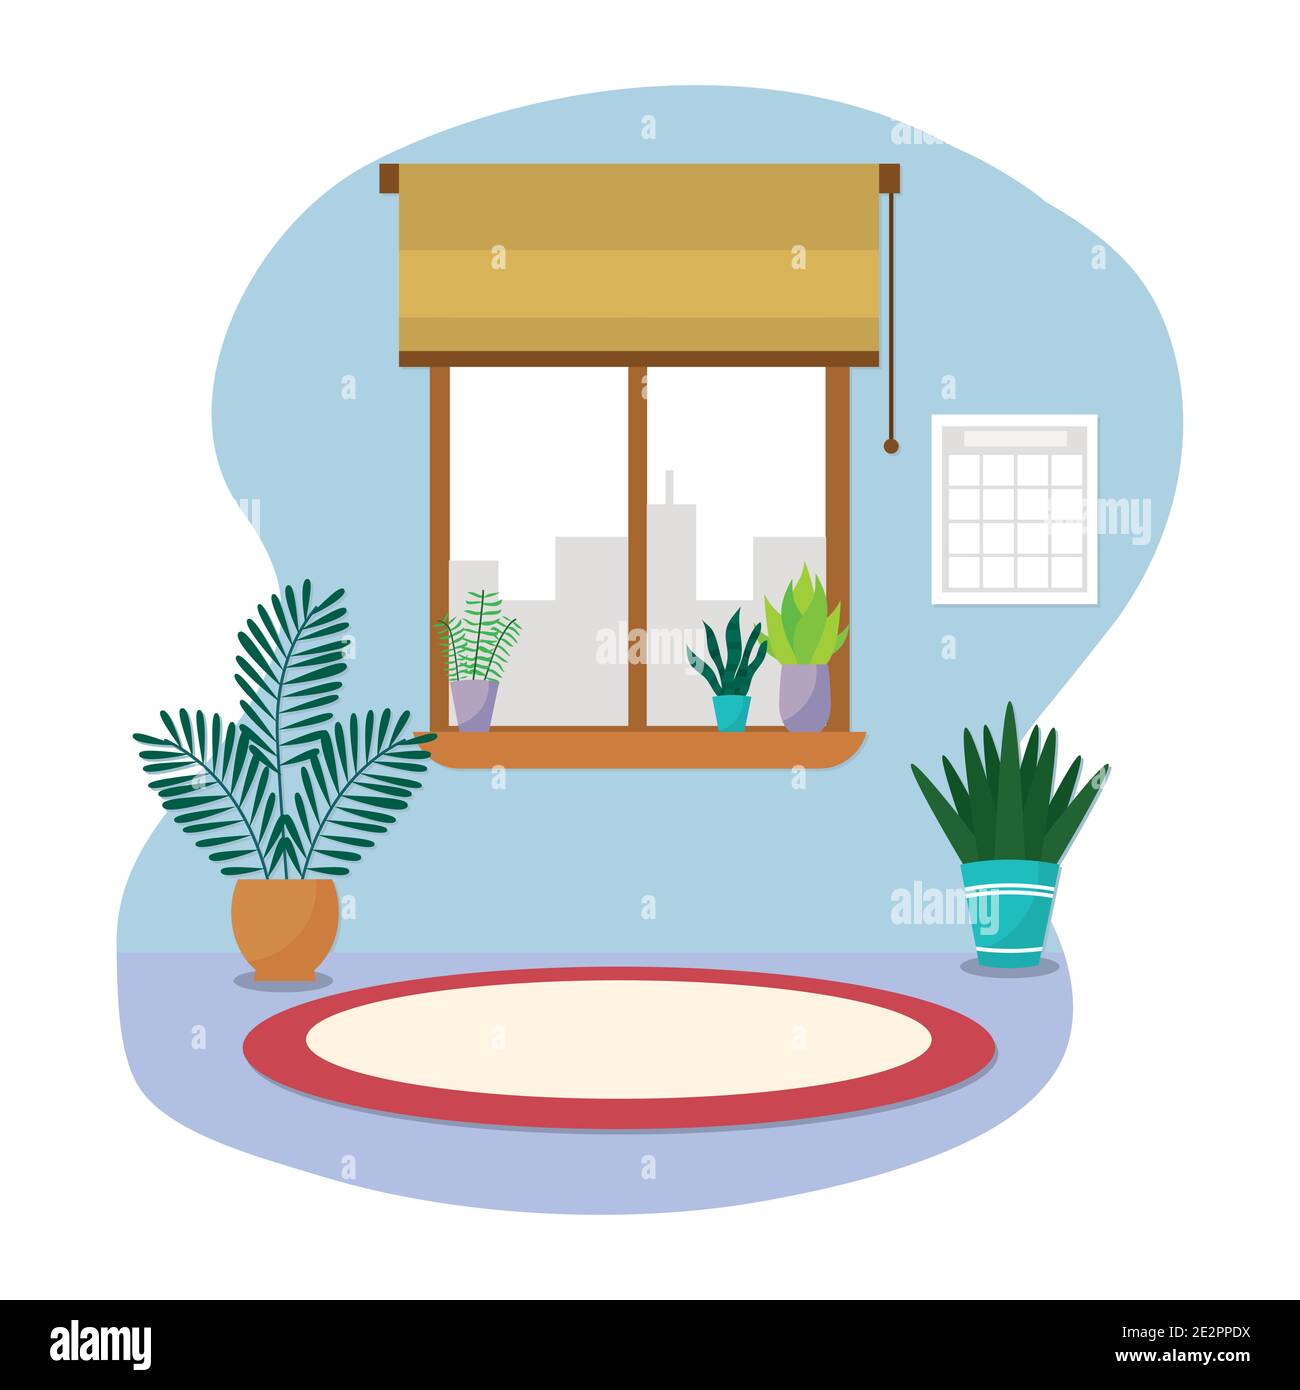 house room with decorative plants around over white background, colorful design, vector illustration Stock Vector